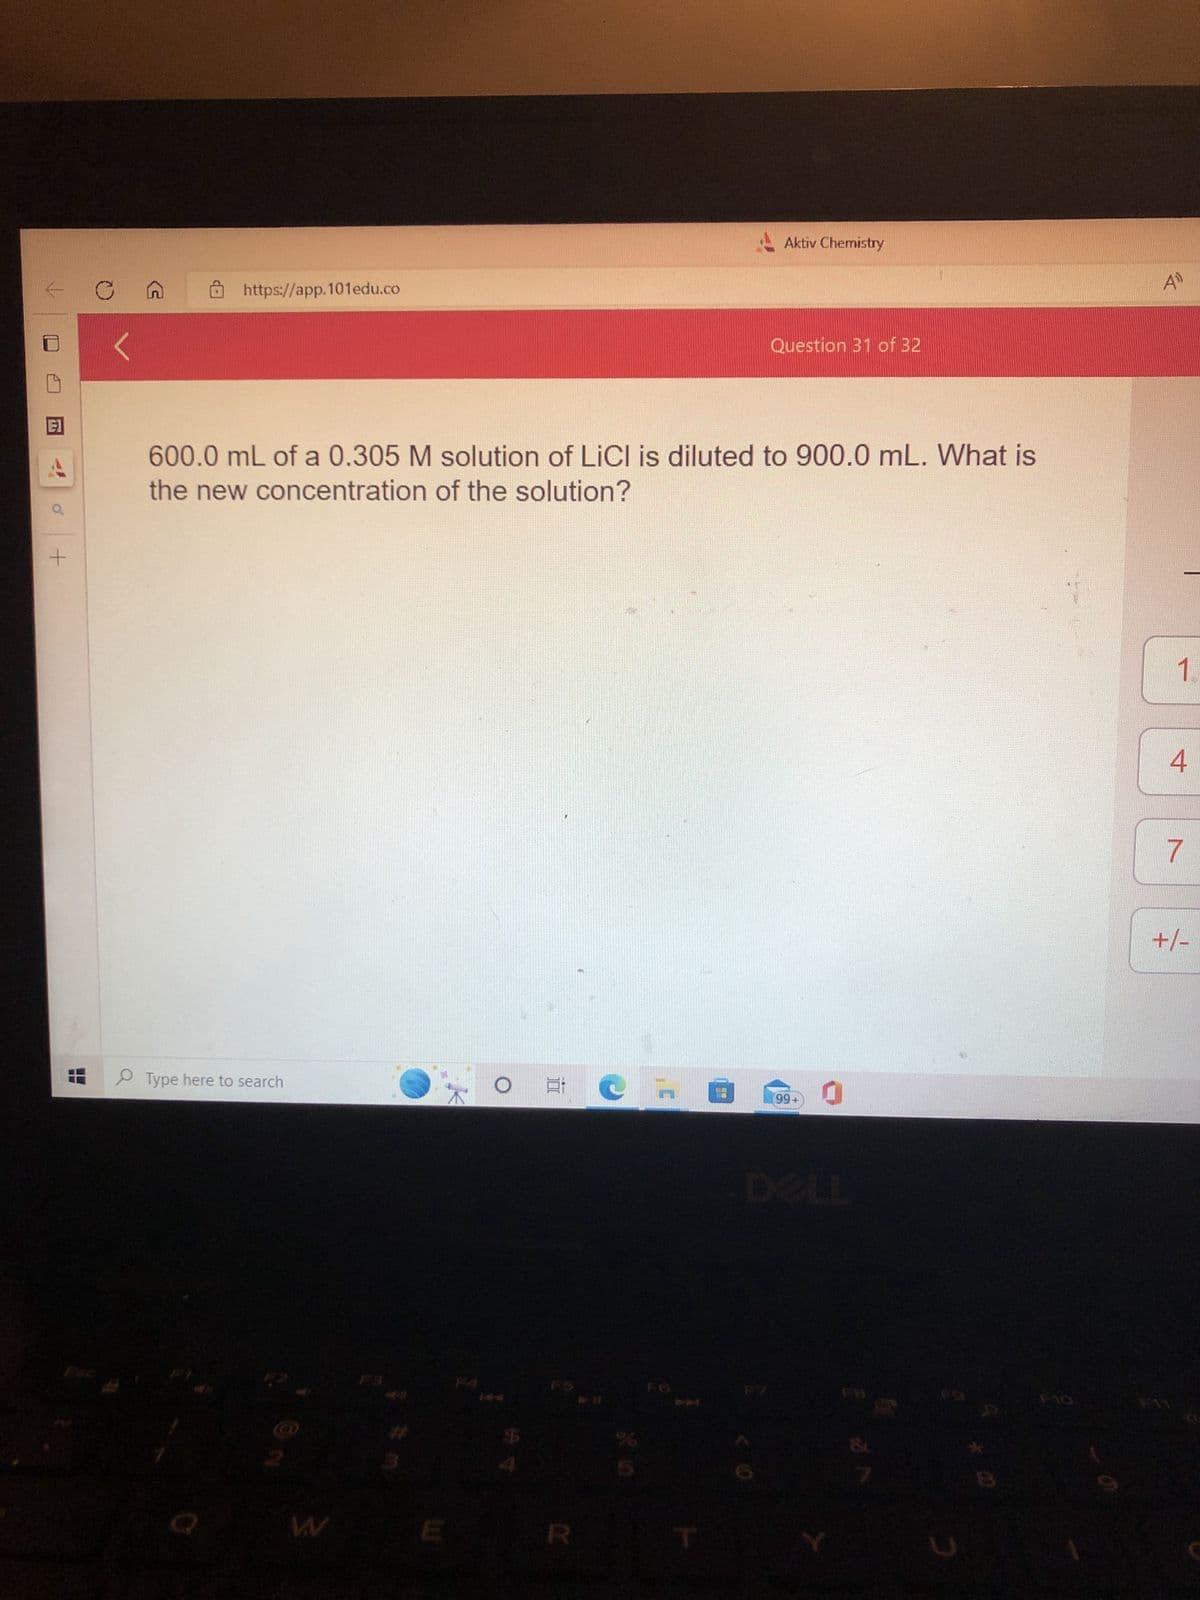 +
T
https://app.101edu.co
Type here to search
600.0 mL of a 0.305 M solution of LiCl is diluted to 900.0 mL. What is
the new concentration of the solution?
W
$
Ai
R
Aktiv Chemistry
n
Question 31 of 32
99+
0
F10
49
1.
4
7
+/-